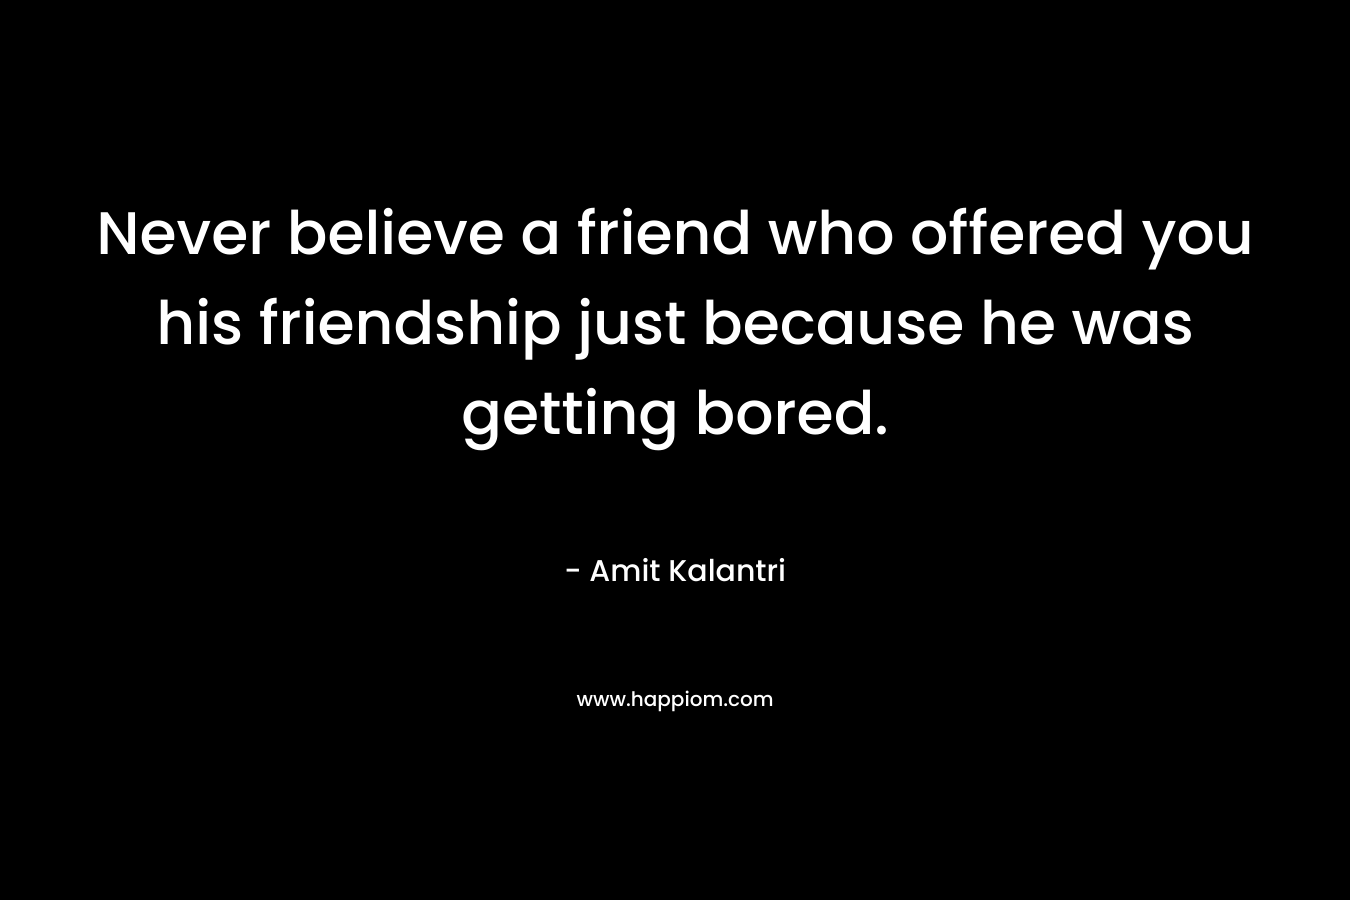 Never believe a friend who offered you his friendship just because he was getting bored.